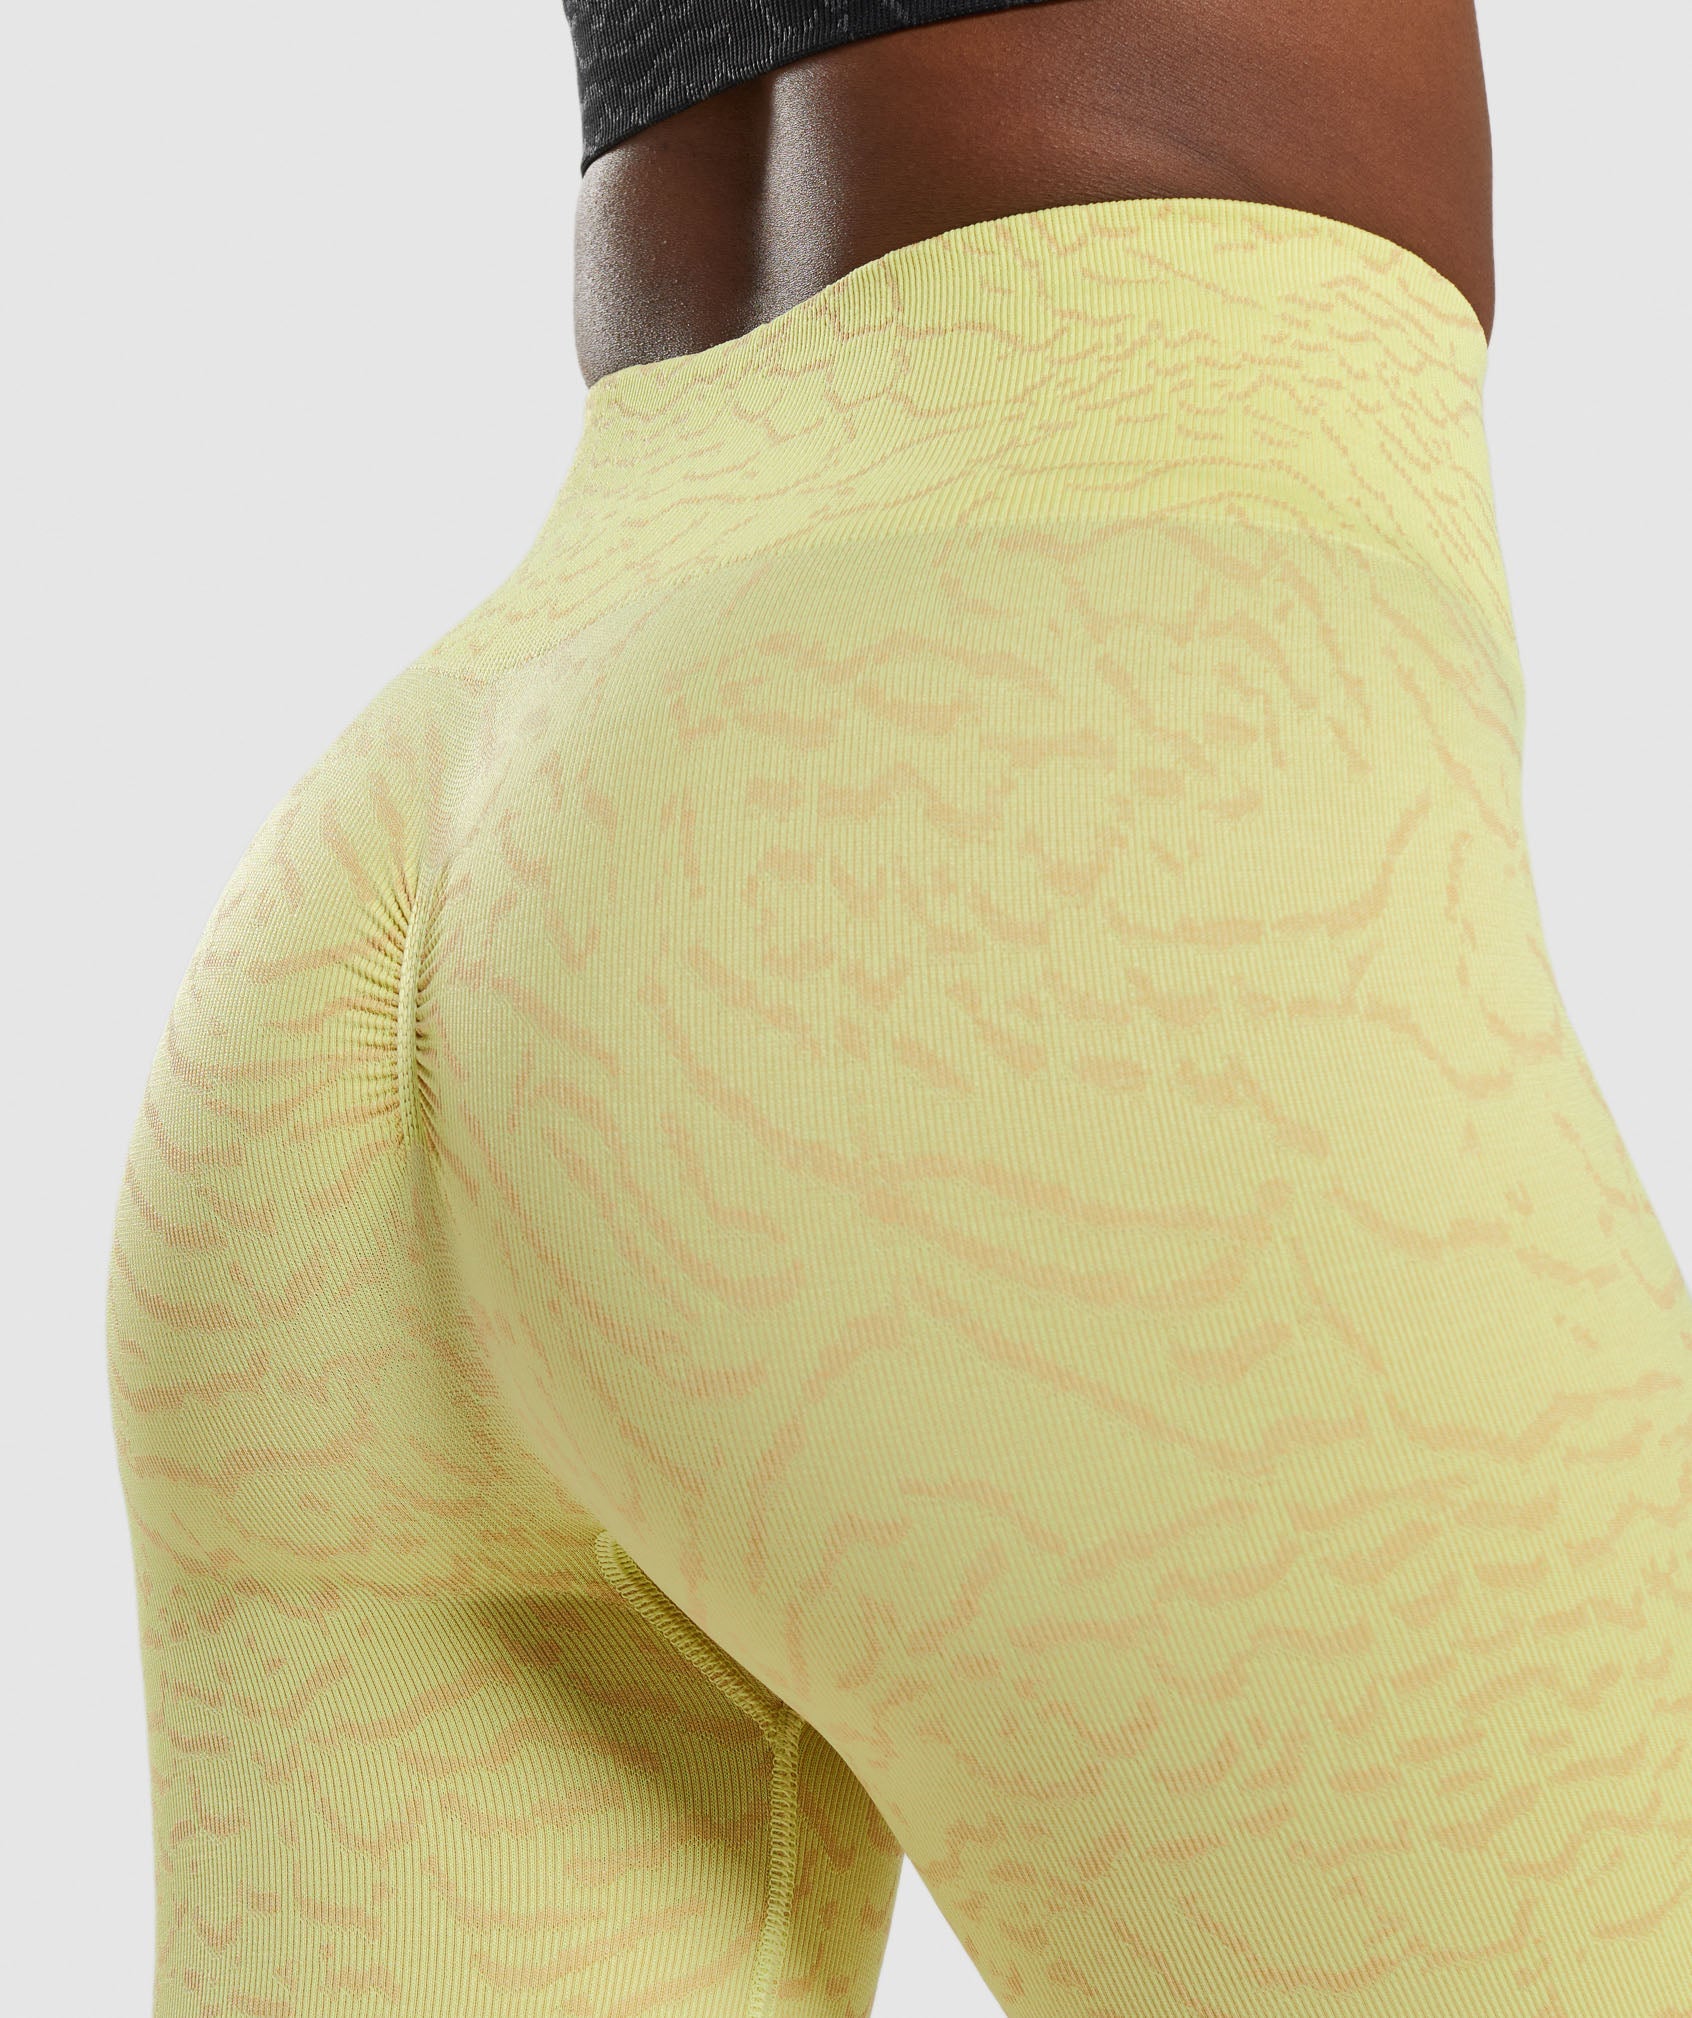 Adapt Animal Seamless Cycling Shorts in Firefly Yellow